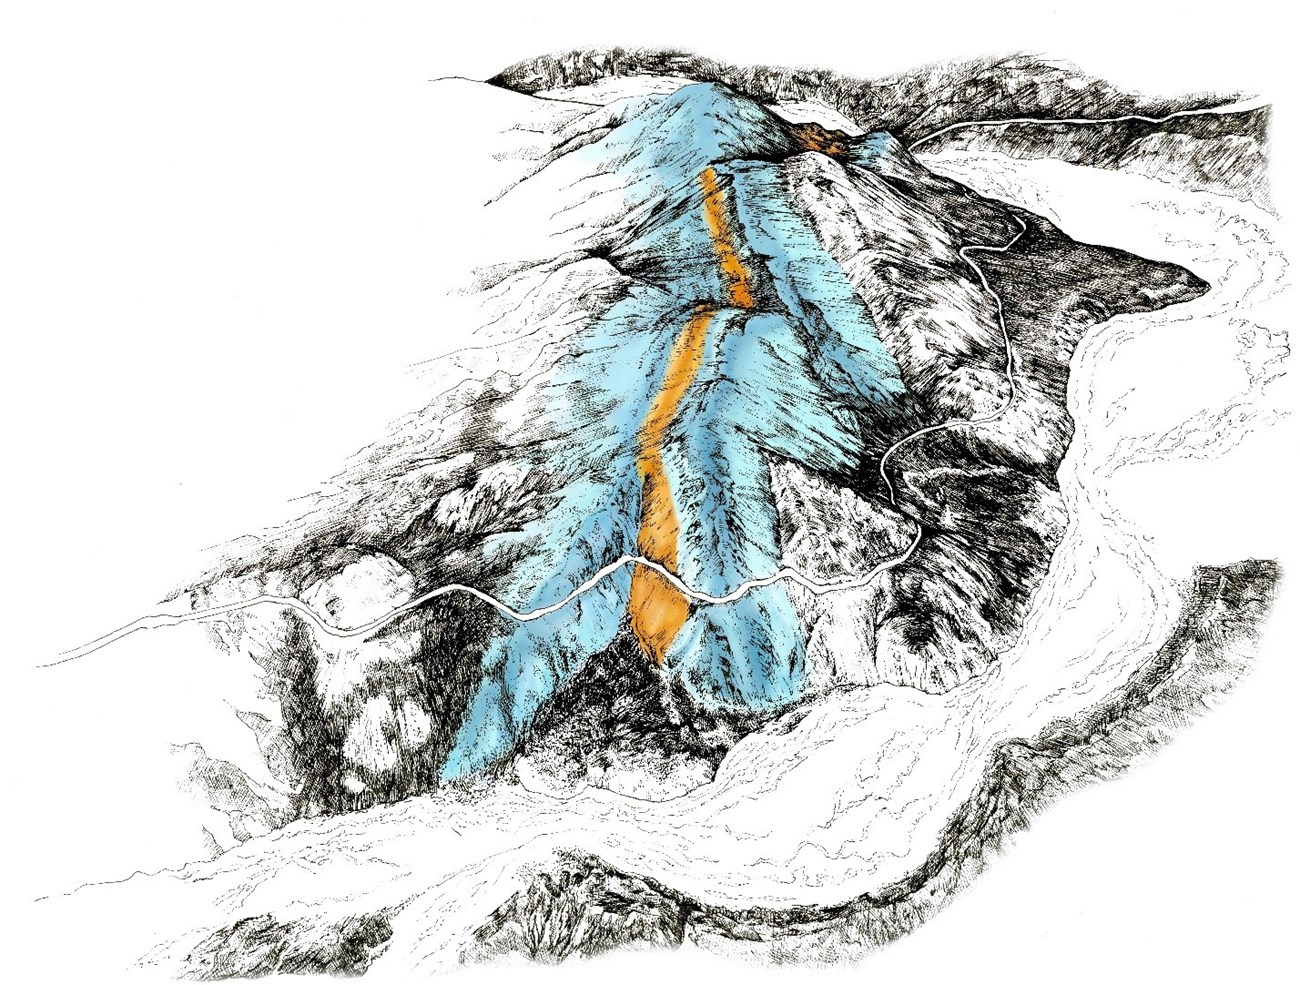 aerial illustration of a mountain with shading to indicate areas of instability